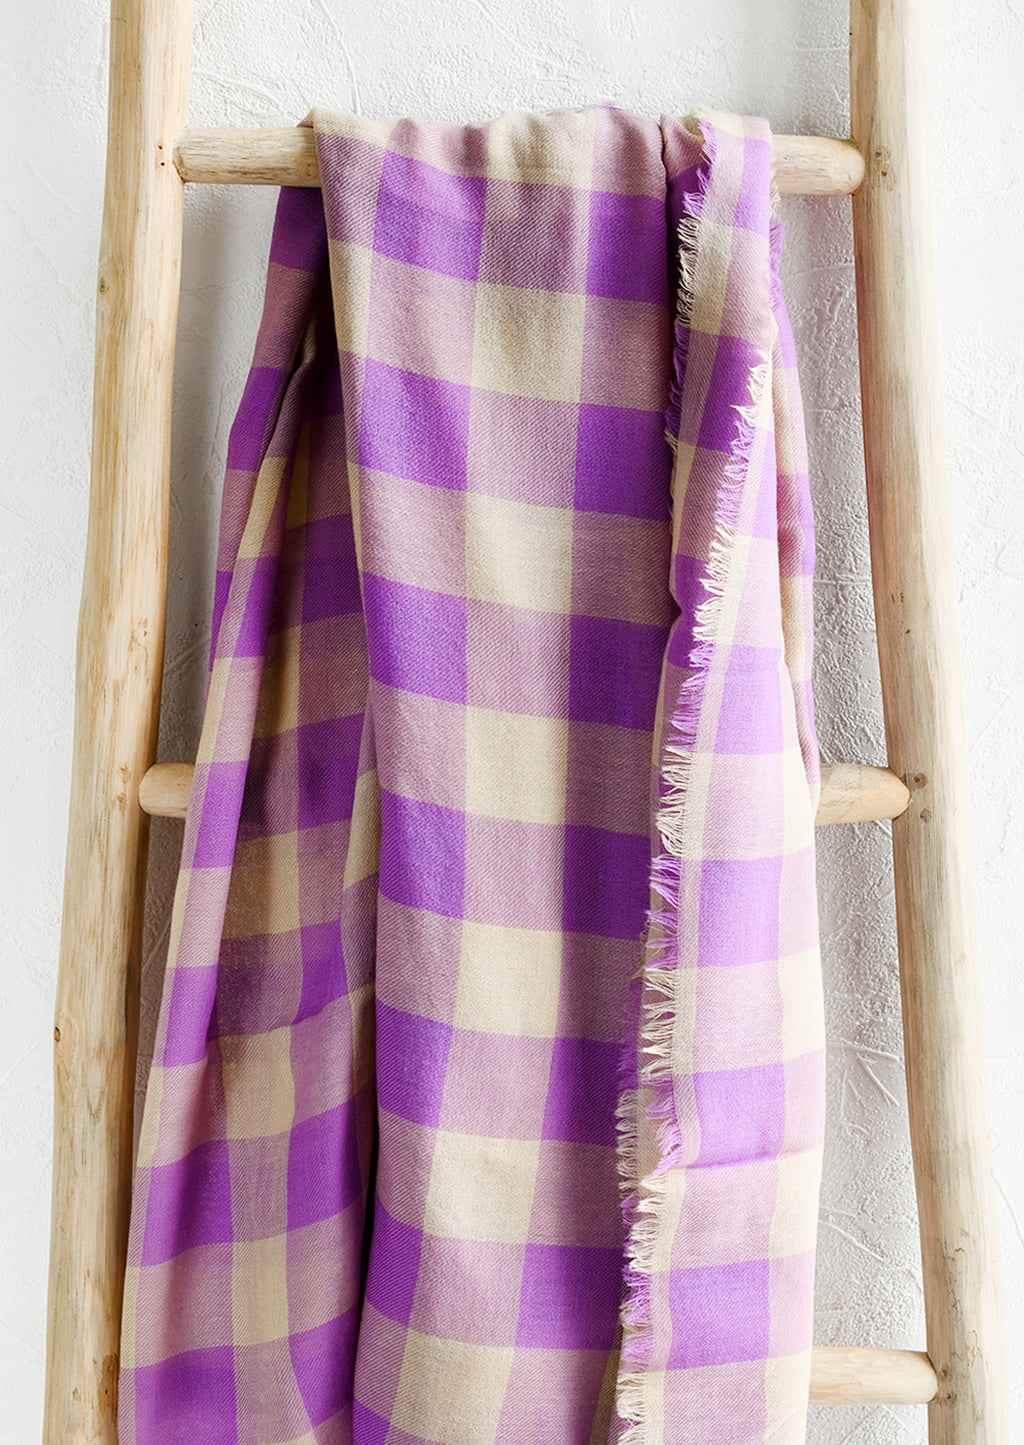 1: A gingham print scarf in purple and tan.